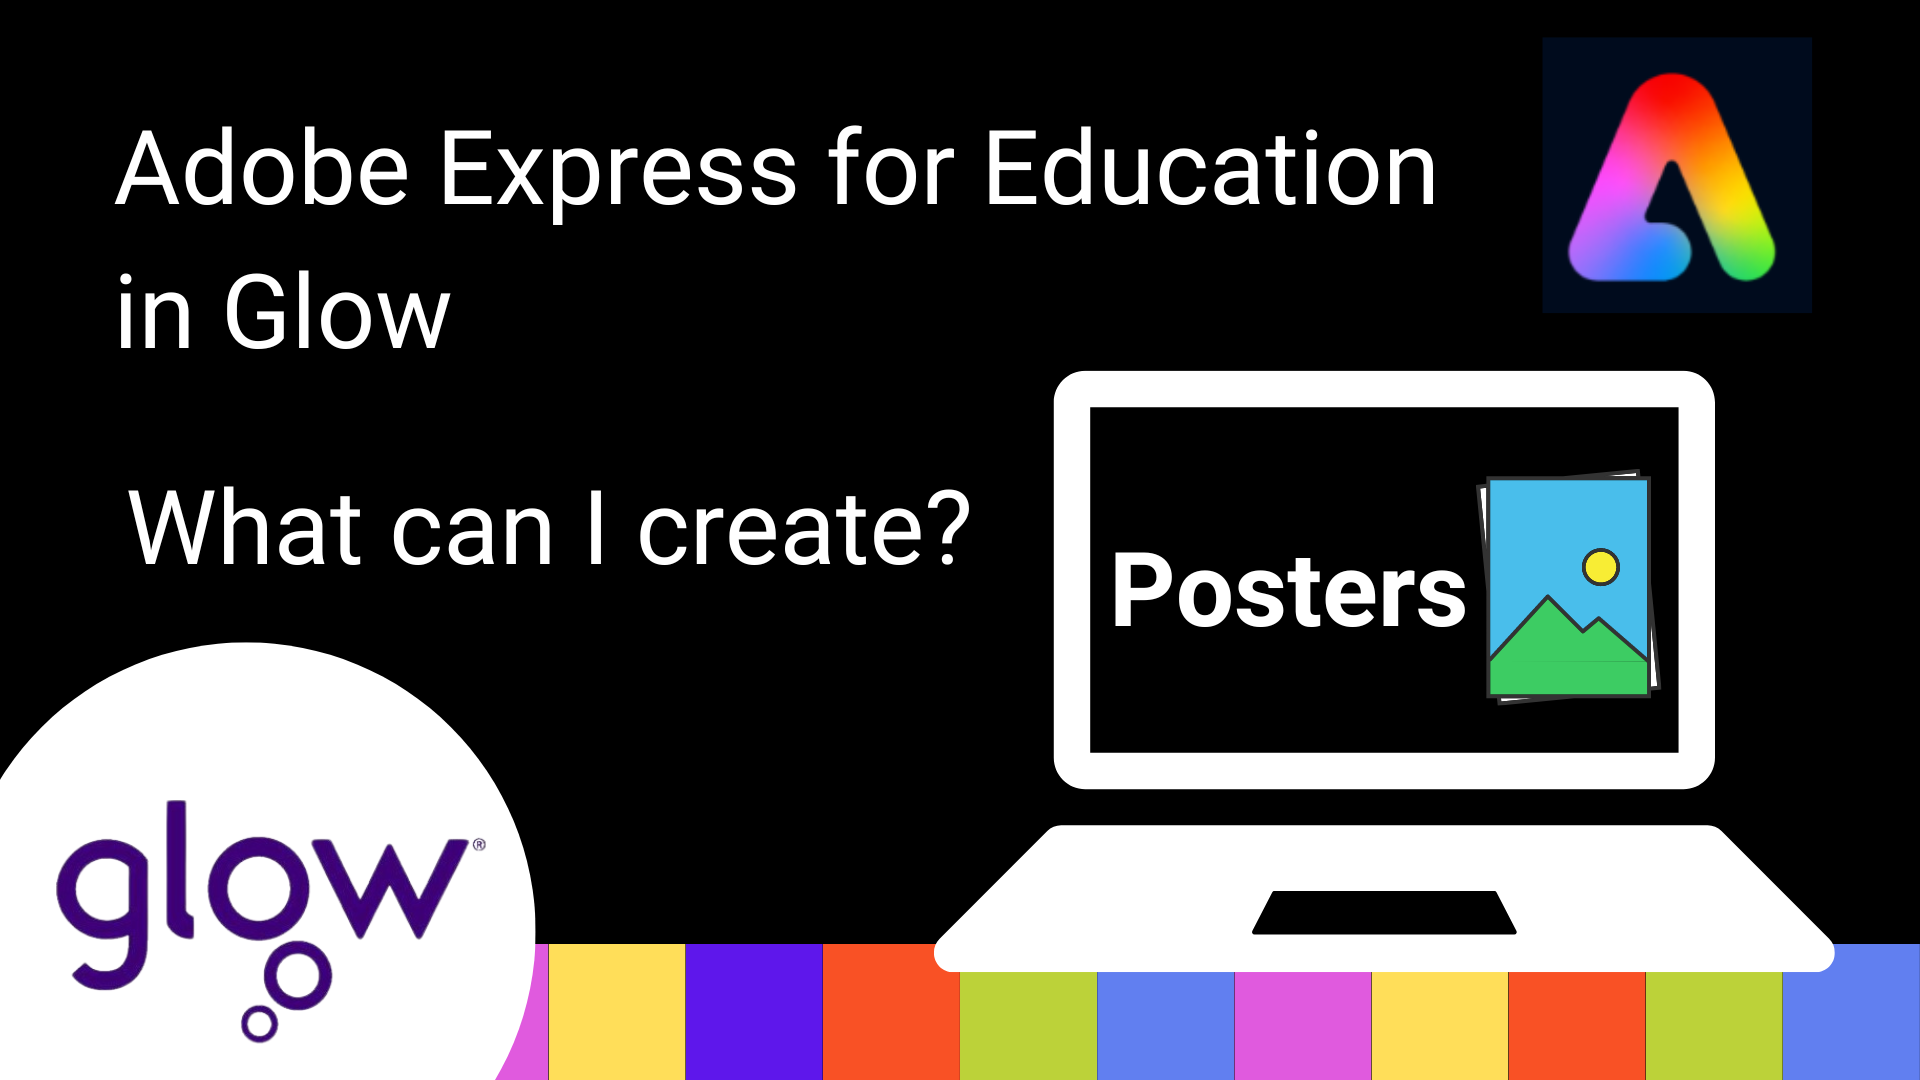 Adobe Express for Education in glow graphic. What can I create? Posters